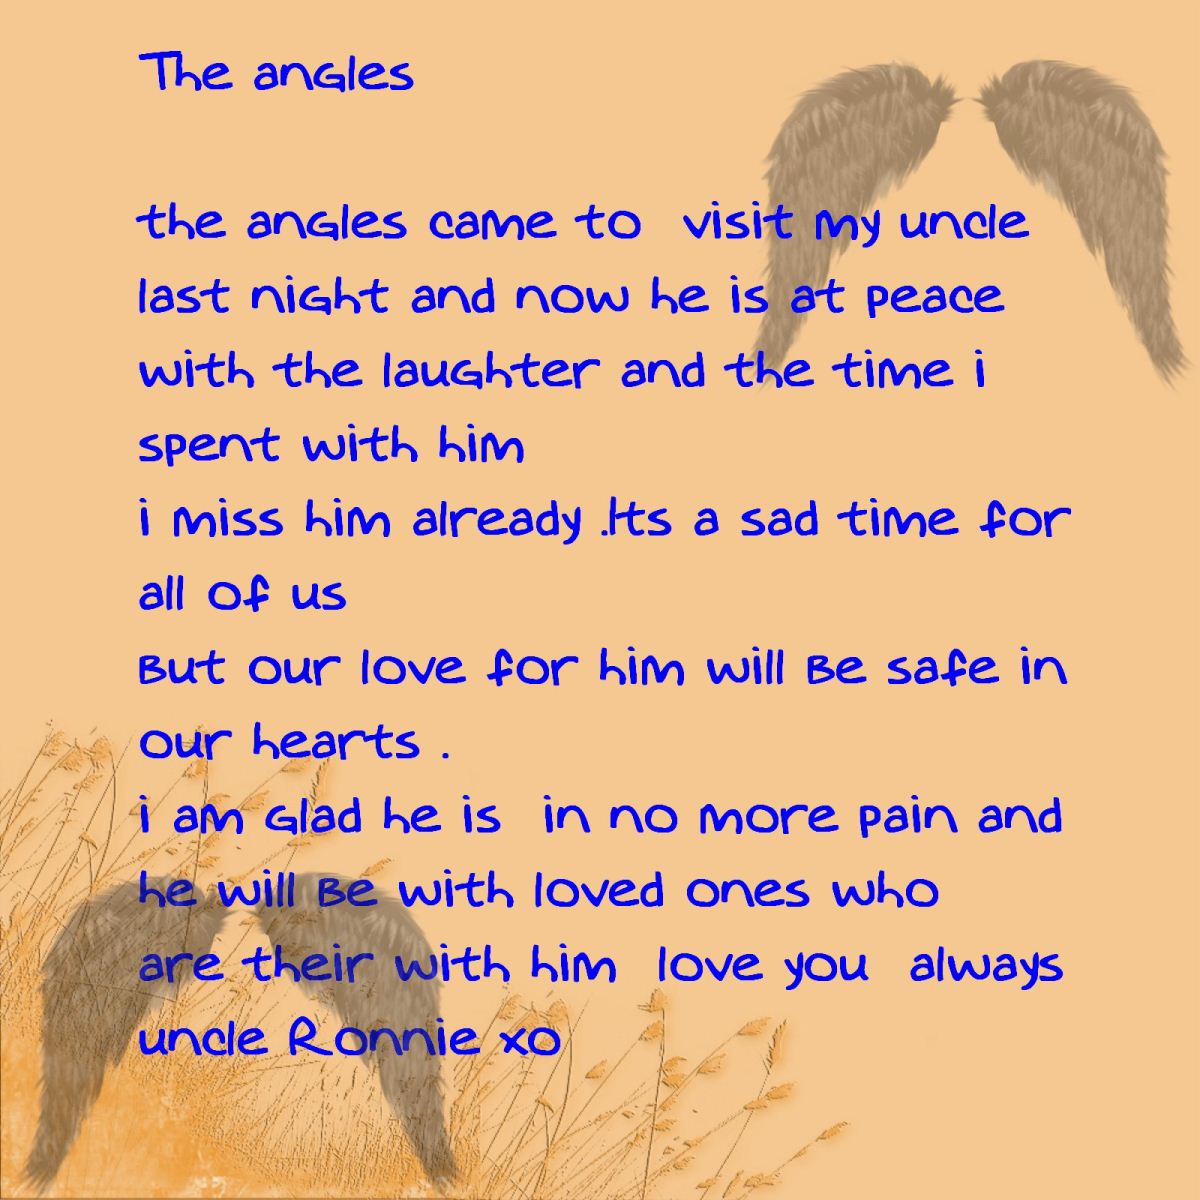 Pictures And Quotes About Losing Your Uncle. QuotesGram